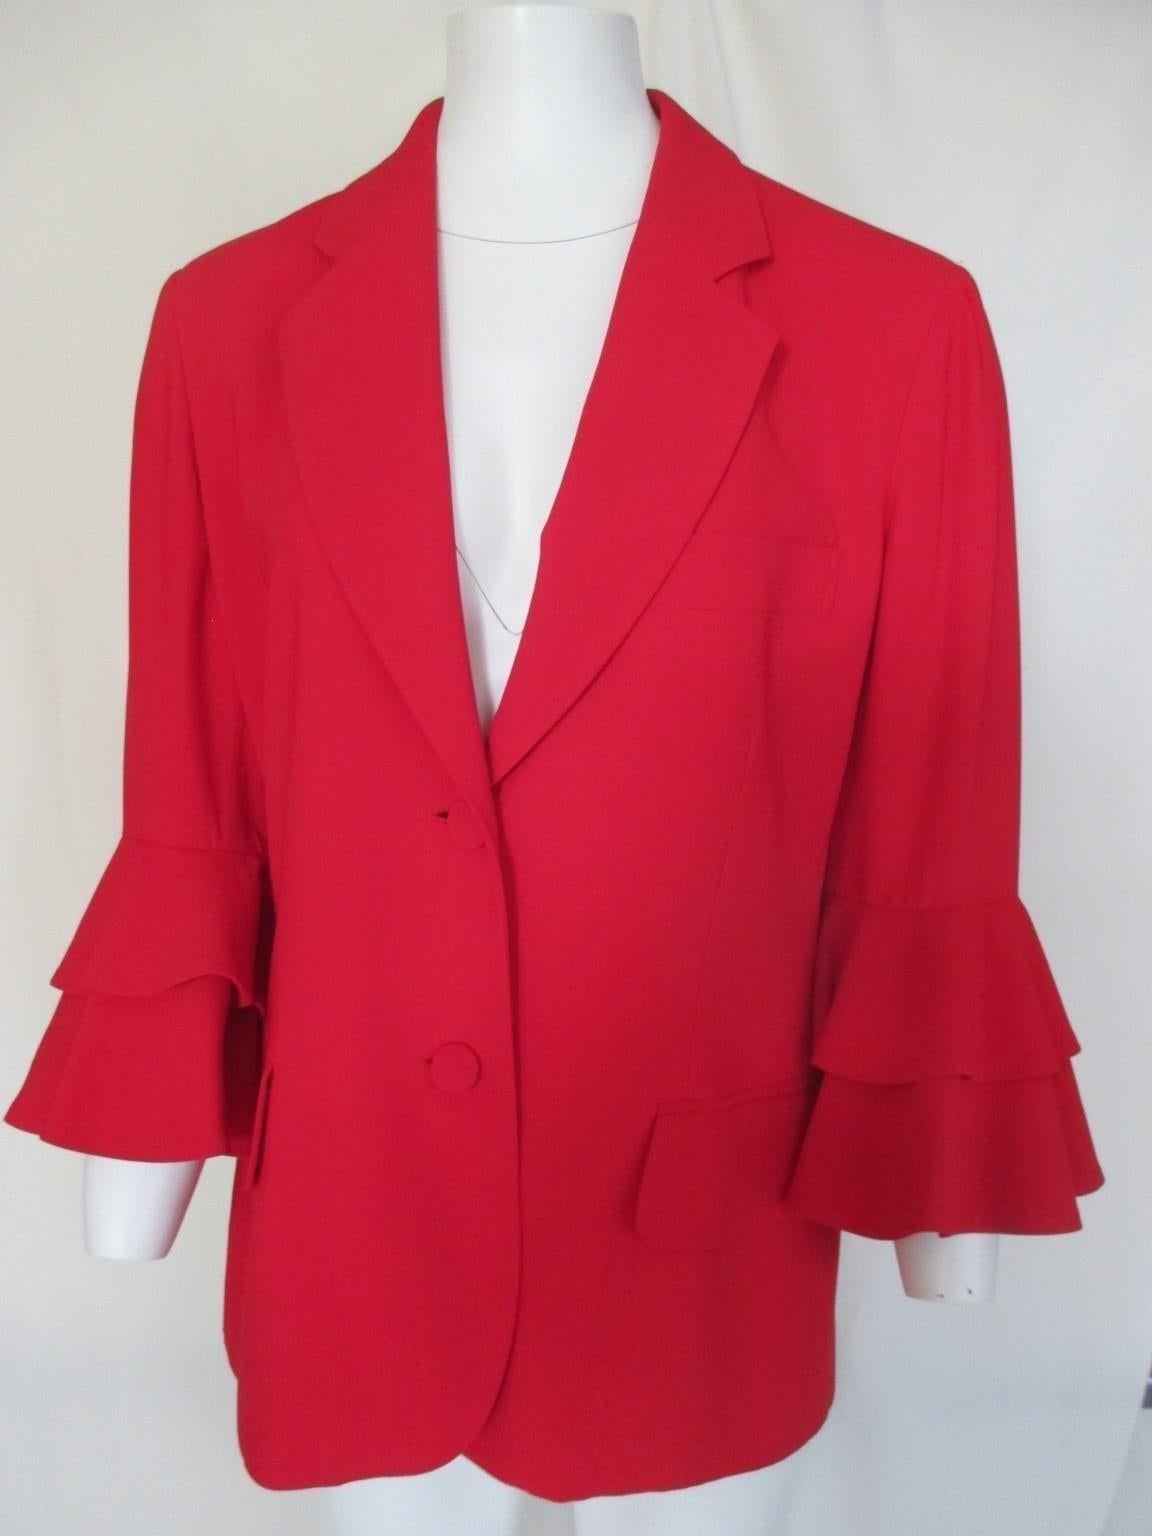 Moschino Couture! Repetita Juvant Red Blazer Jacket For Sale 3